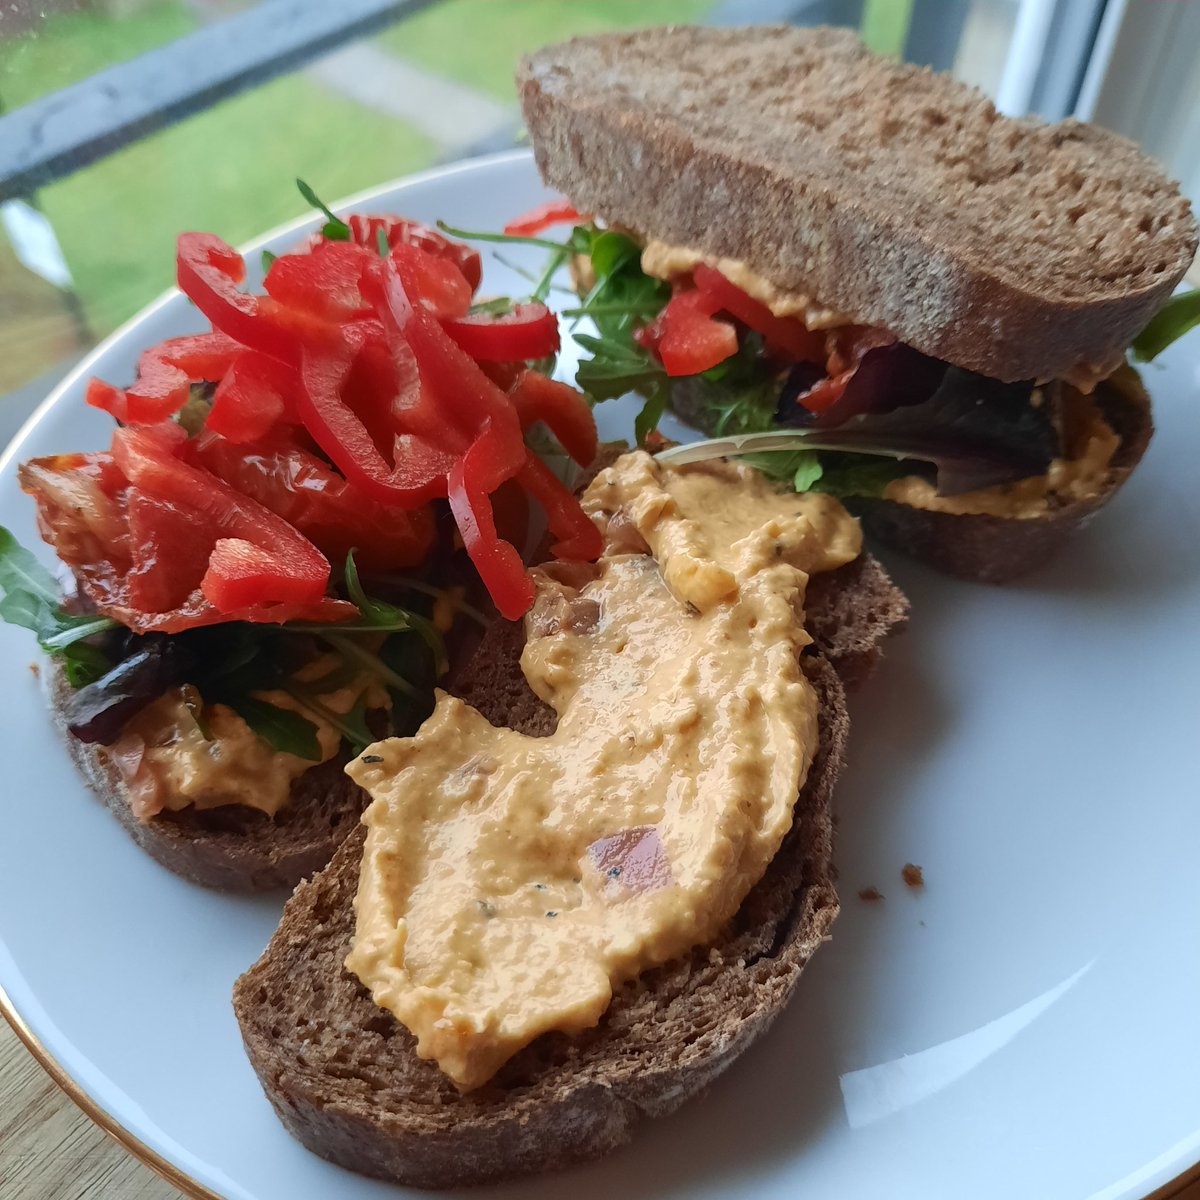 My today's healthy swap for cancer prevention @WCRF_UK #SarnieSwap: rye sourdough bread, moroccan style humus, green leaf salad, red peppers and slow roasted tomatoes 😋 #CPAW23 #BowelCancer #HealthyFood